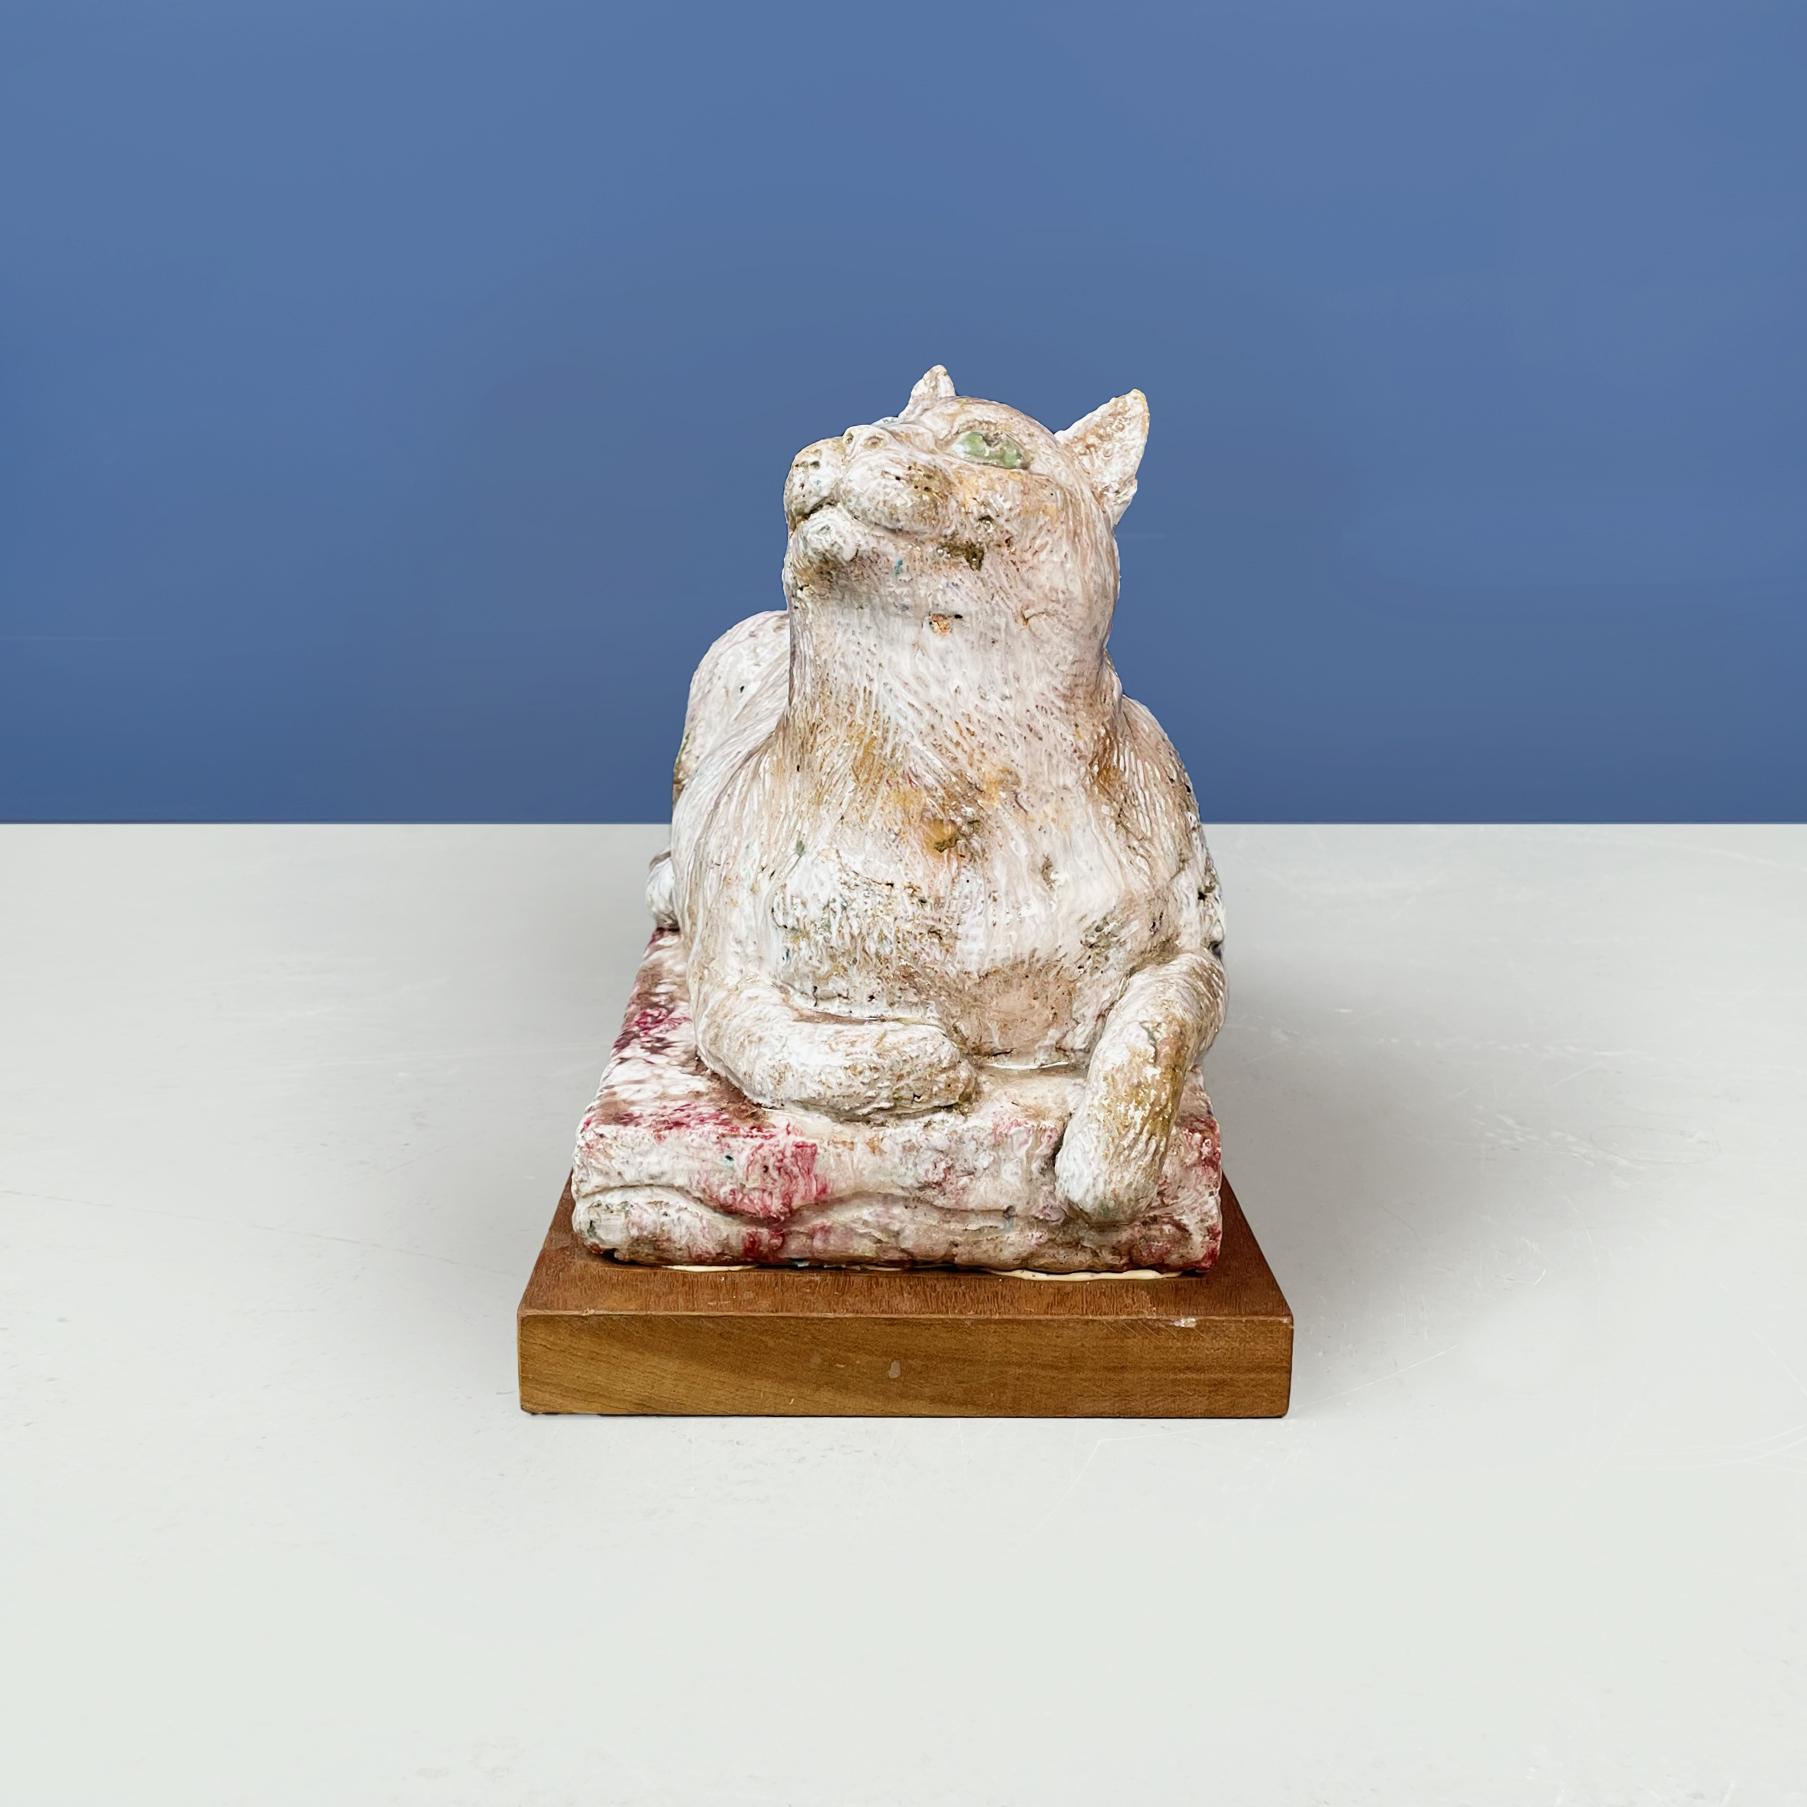 Italian modern Statue of cat in red and white terracotta by M. Moretto, 1980s
Statue of cat lying down looking upwards, in withe soft pink and red painted terracotta. 
The cat's eyes are green. Finely crafted. Wooden base.
Produced by M. Moretto in